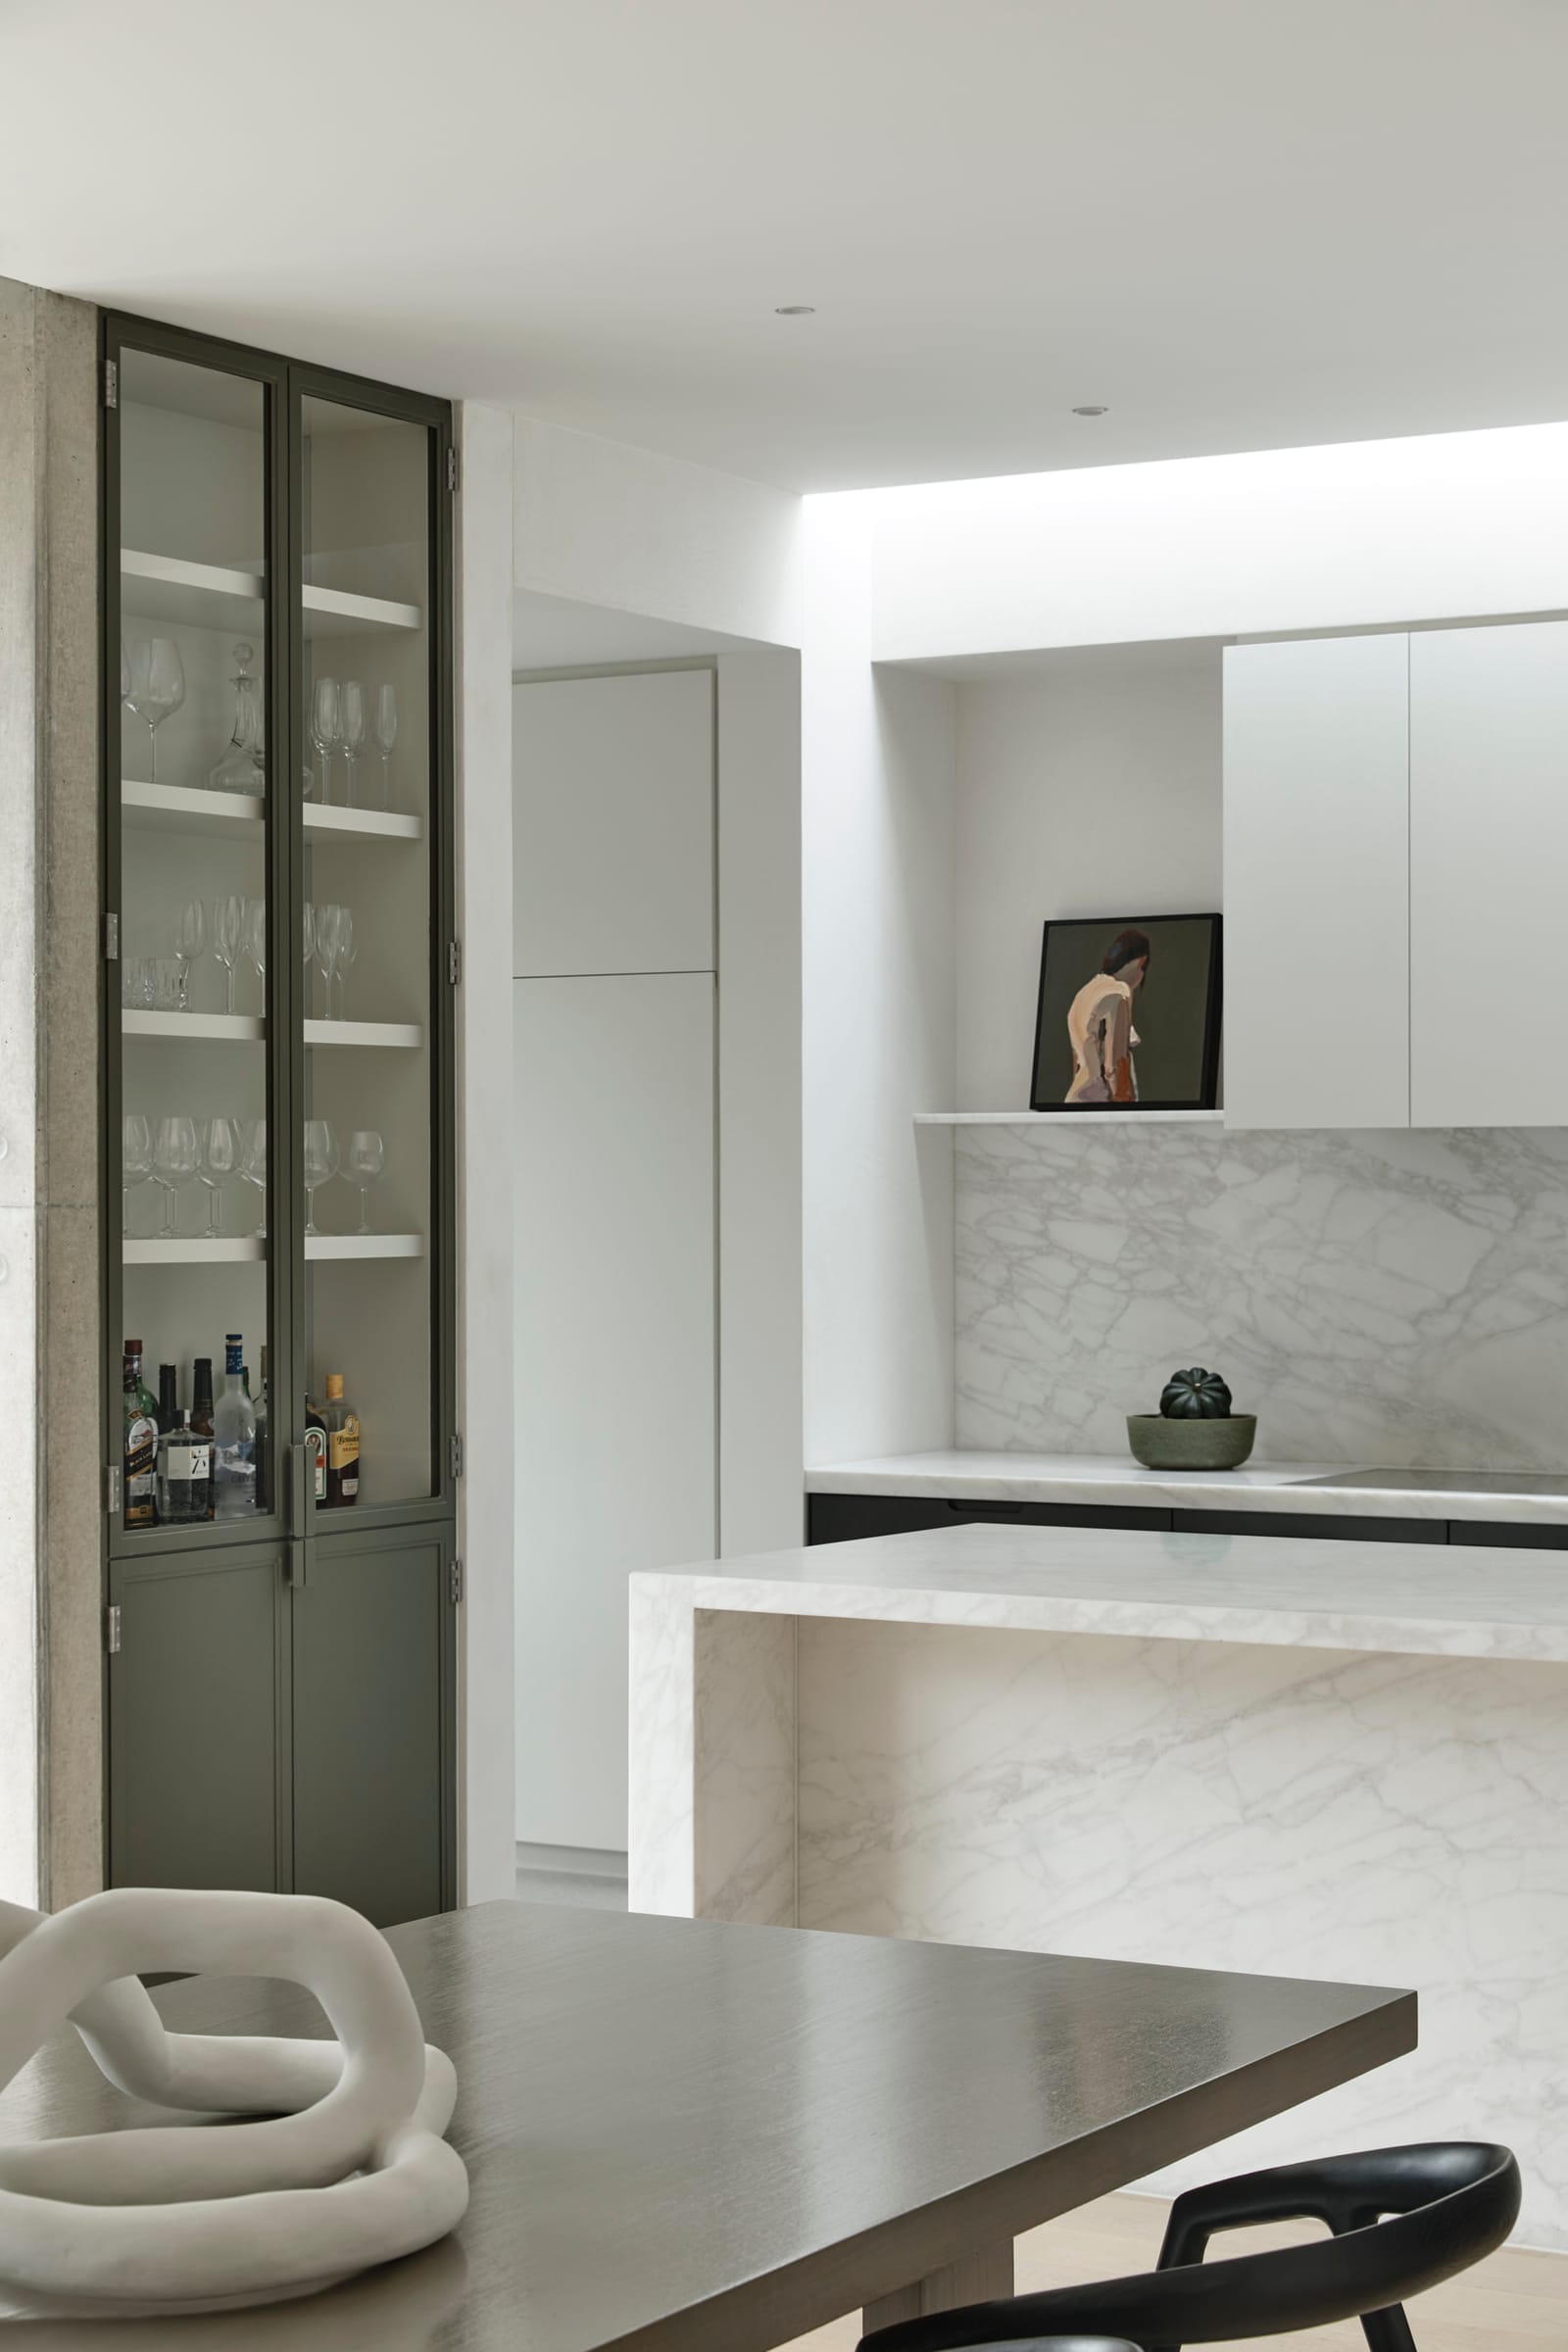 RE Residence by Inglis Architects.minimalist kitchen space with a marble countertop extending to a backsplash. On the left, a tall cabinet with glass doors reveals an organized display of glassware and bottles, suggesting a built-in bar area. To the right, a niche in the wall displays a small sculpture, adding a personal touch. A chunky, sculptural grey knot decorates the foreground, sitting on a wooden table accompanied by a sleek black chair, blending functional design with artistic elements. The overall palette is neutral, with natural light softening the space.